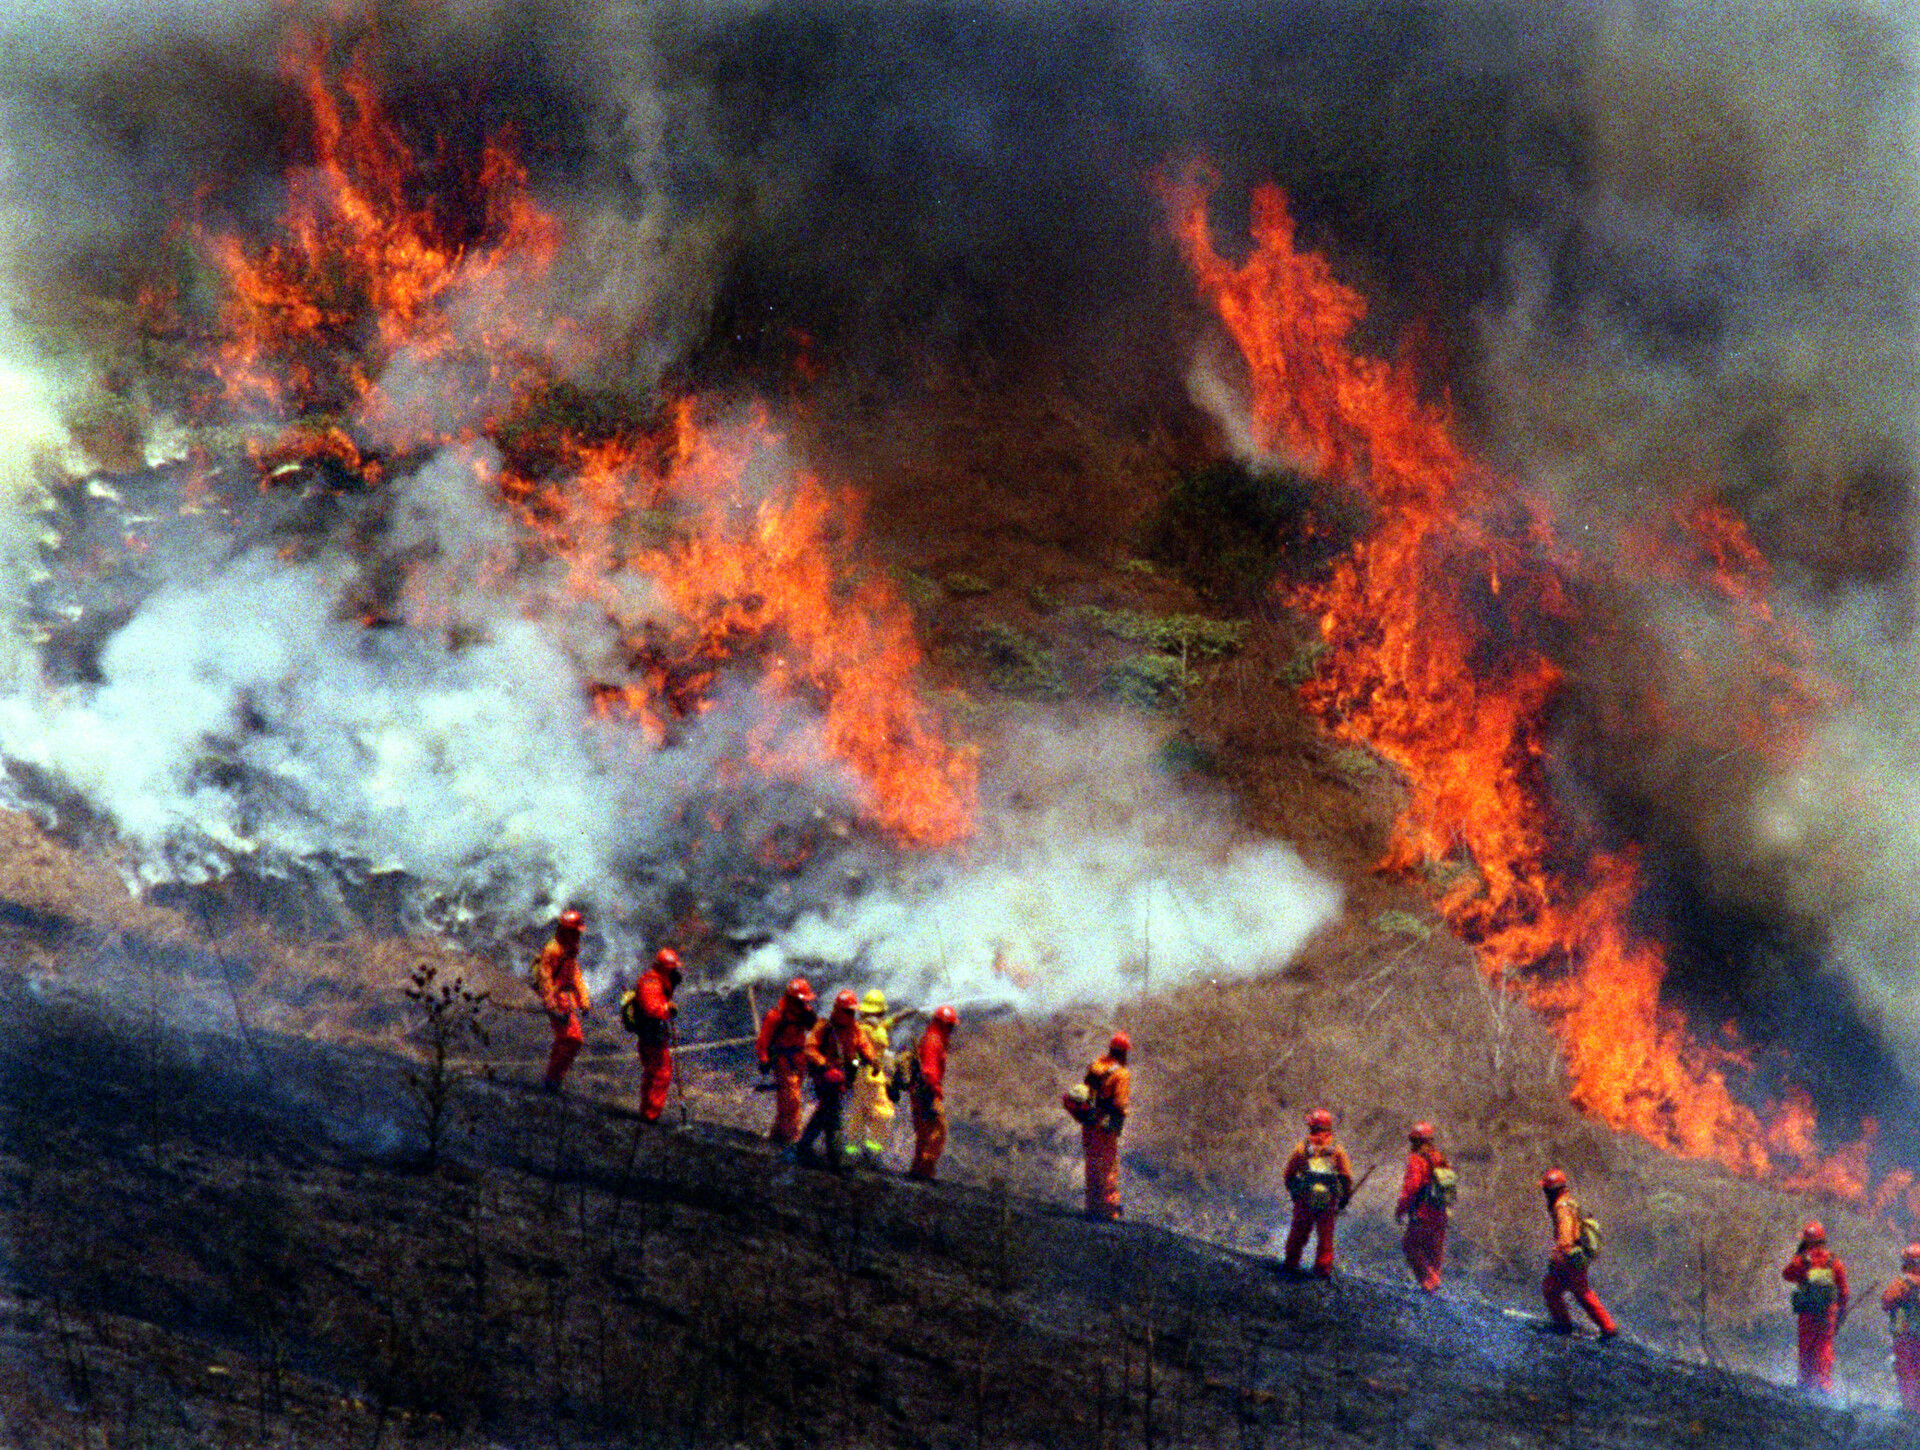 Firefighters in orange and yellow uniforms stand in front of a burning hillside.